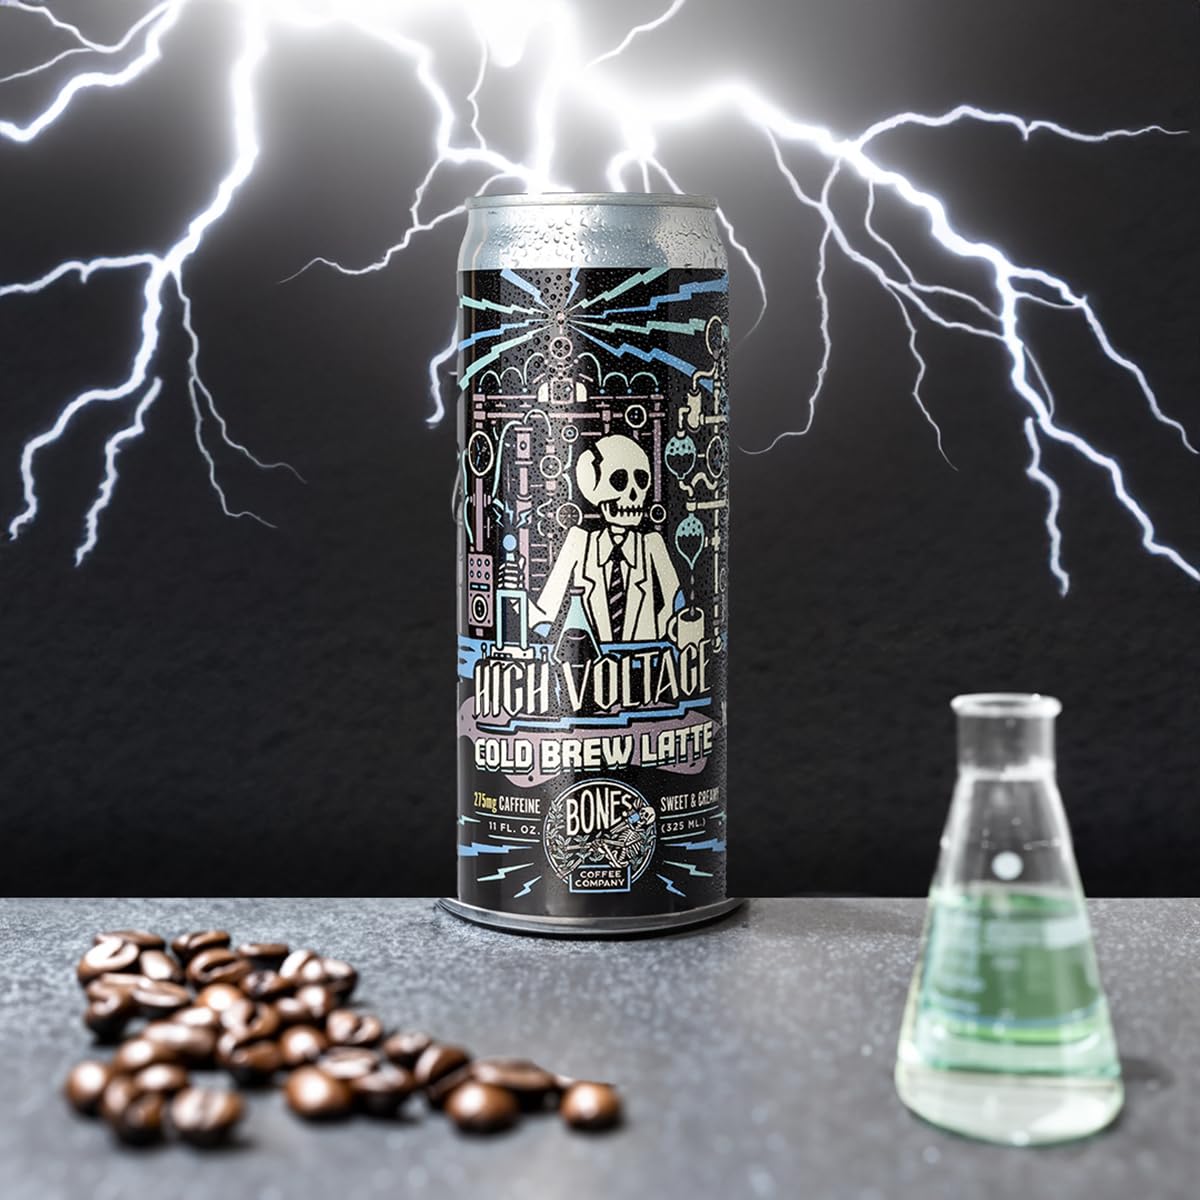 Bones Coffee Company High Voltage Flavored Coffee | Ready To Drink 100% Cold Brew Coffee Can | Cold Brew Latte Sweet and Creamy in Cans | 11 Fl Oz Can (12 Pack) : Grocery & Gourmet Food